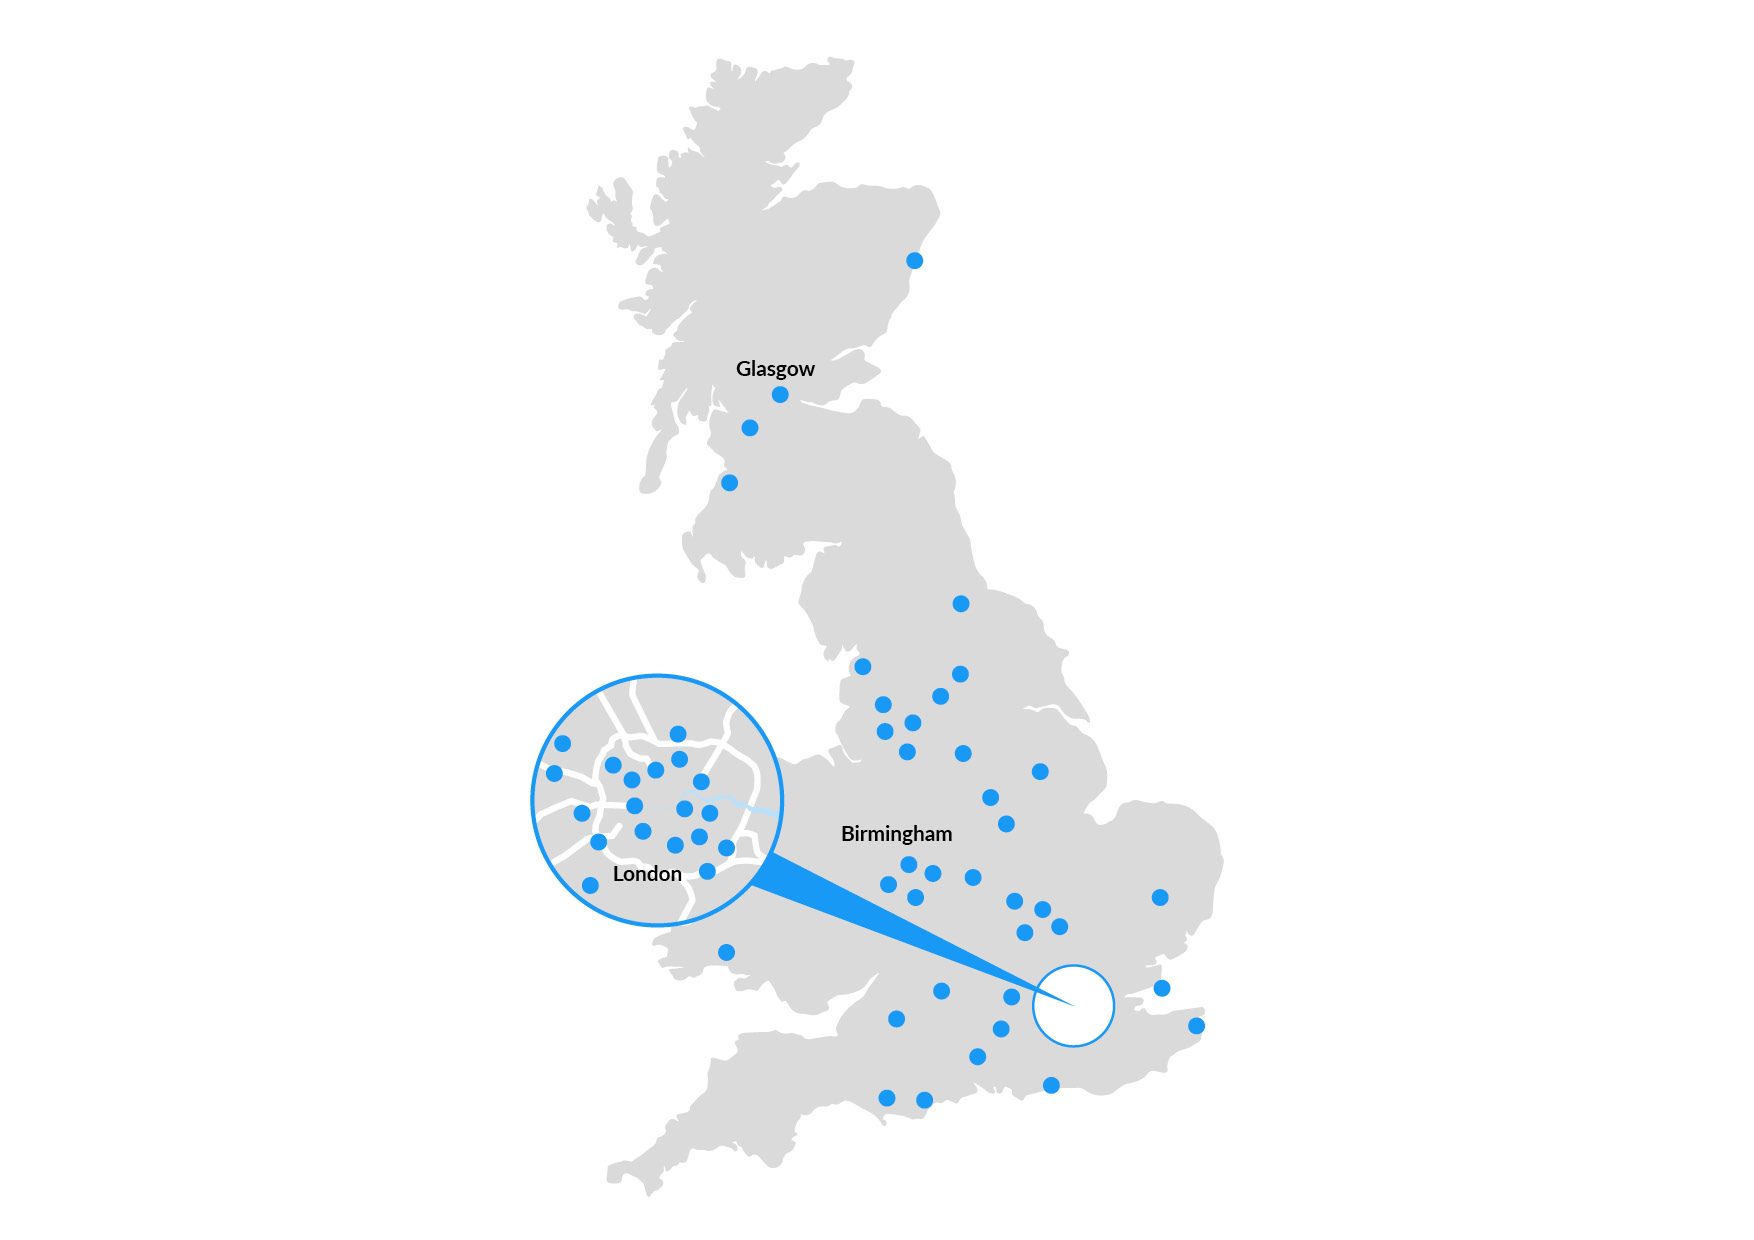 Grey and blue map showing the location of Circle Health Group hospitals across the UK